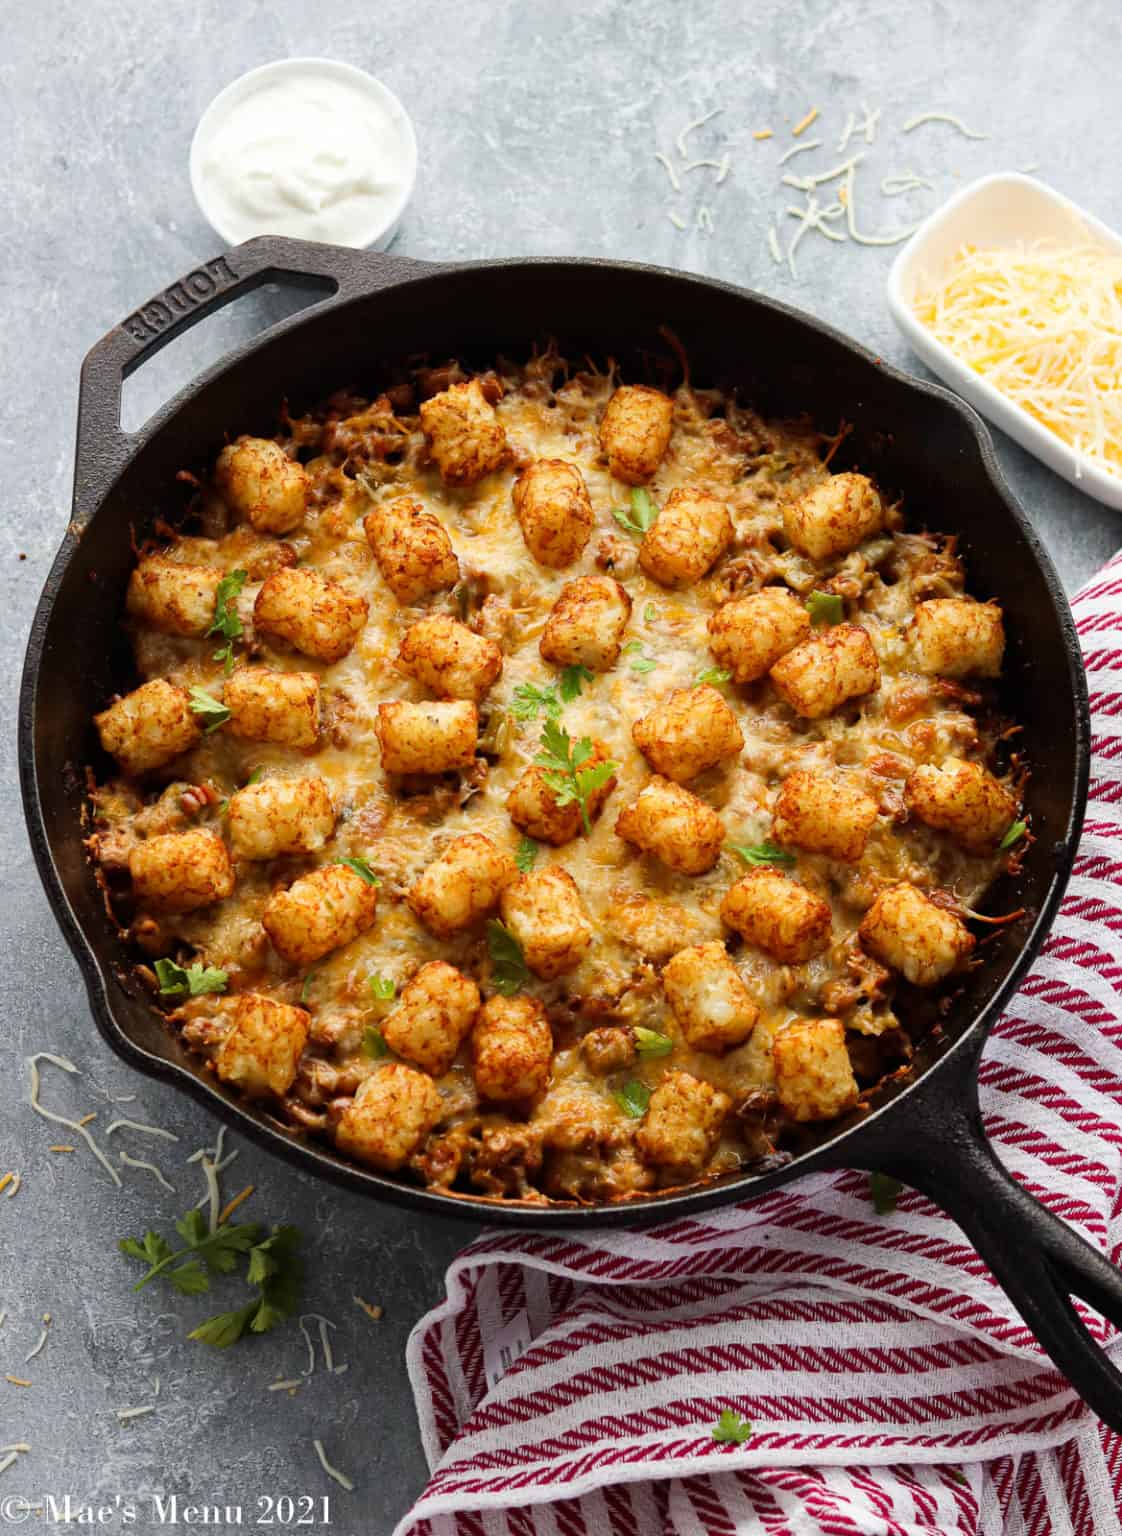 An overhead angled shot of a skillet filled with tater tot casserole.